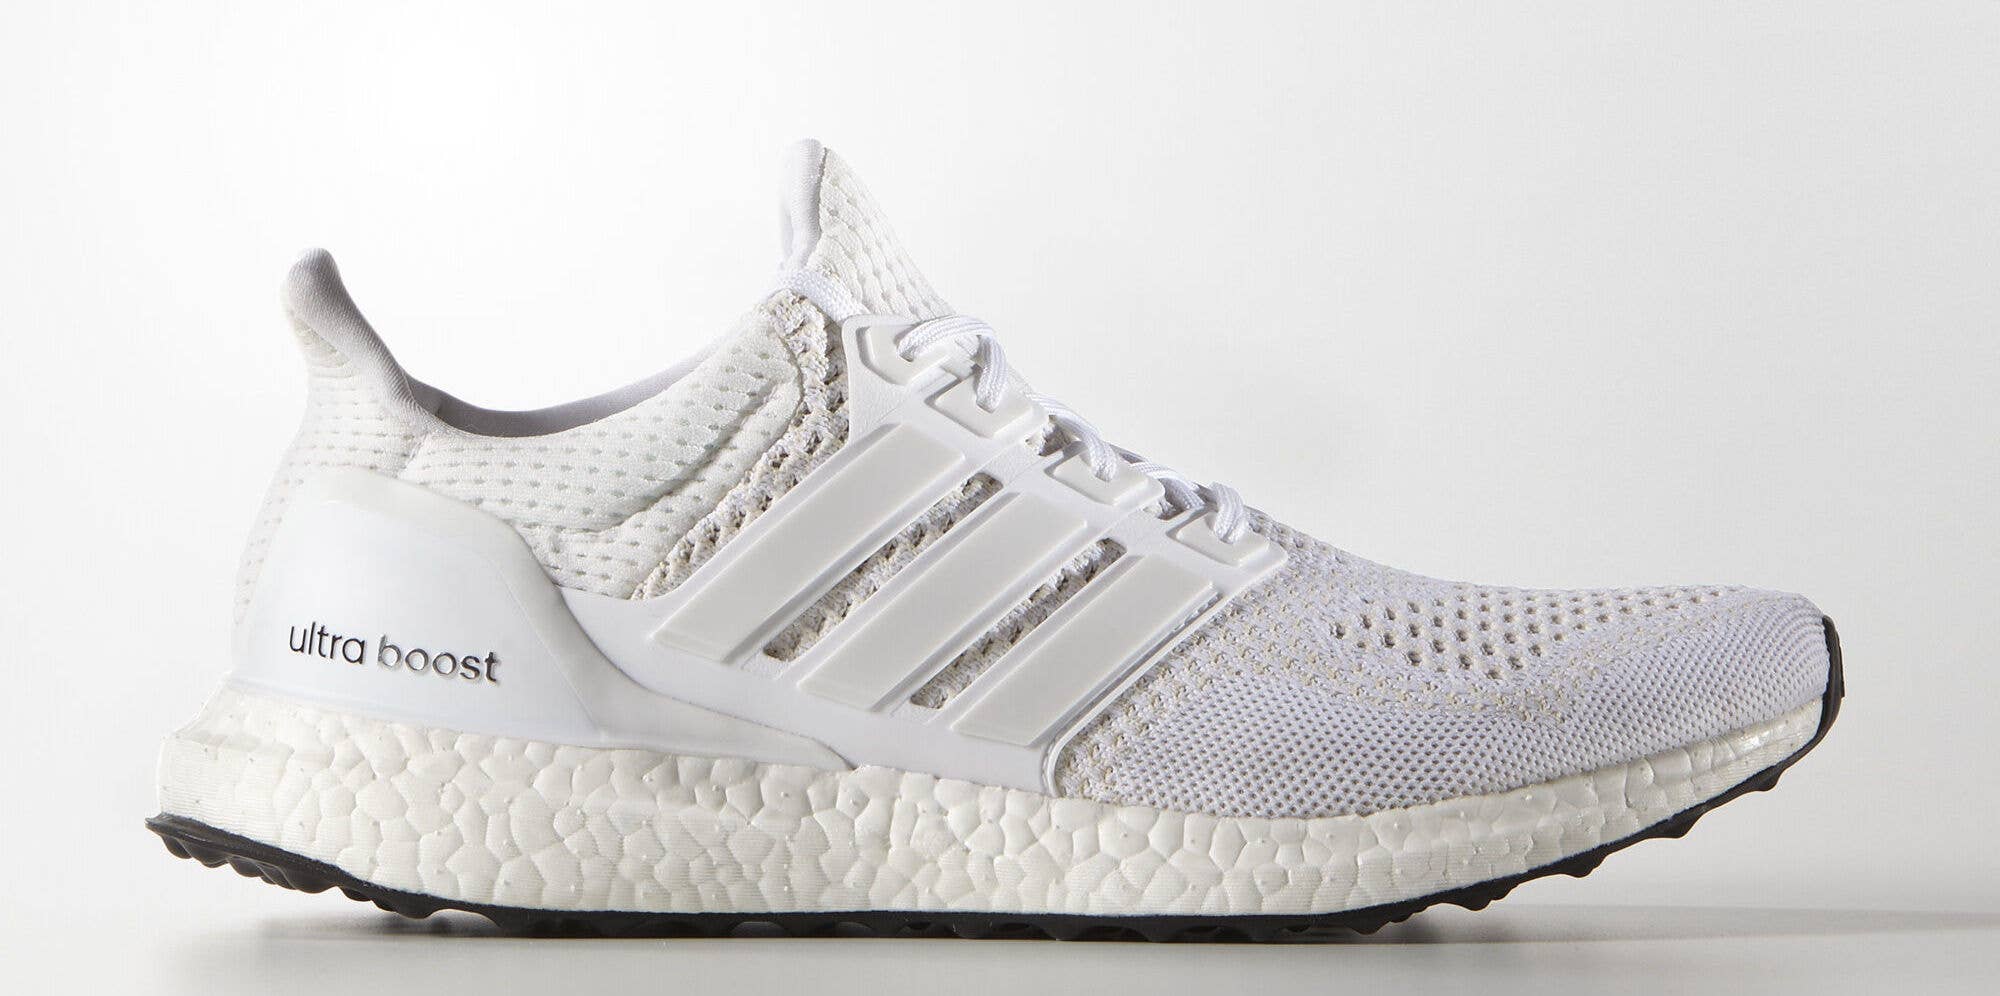 Adidas Ultra Boost 1.0 'Triple White' S77416 Lateral